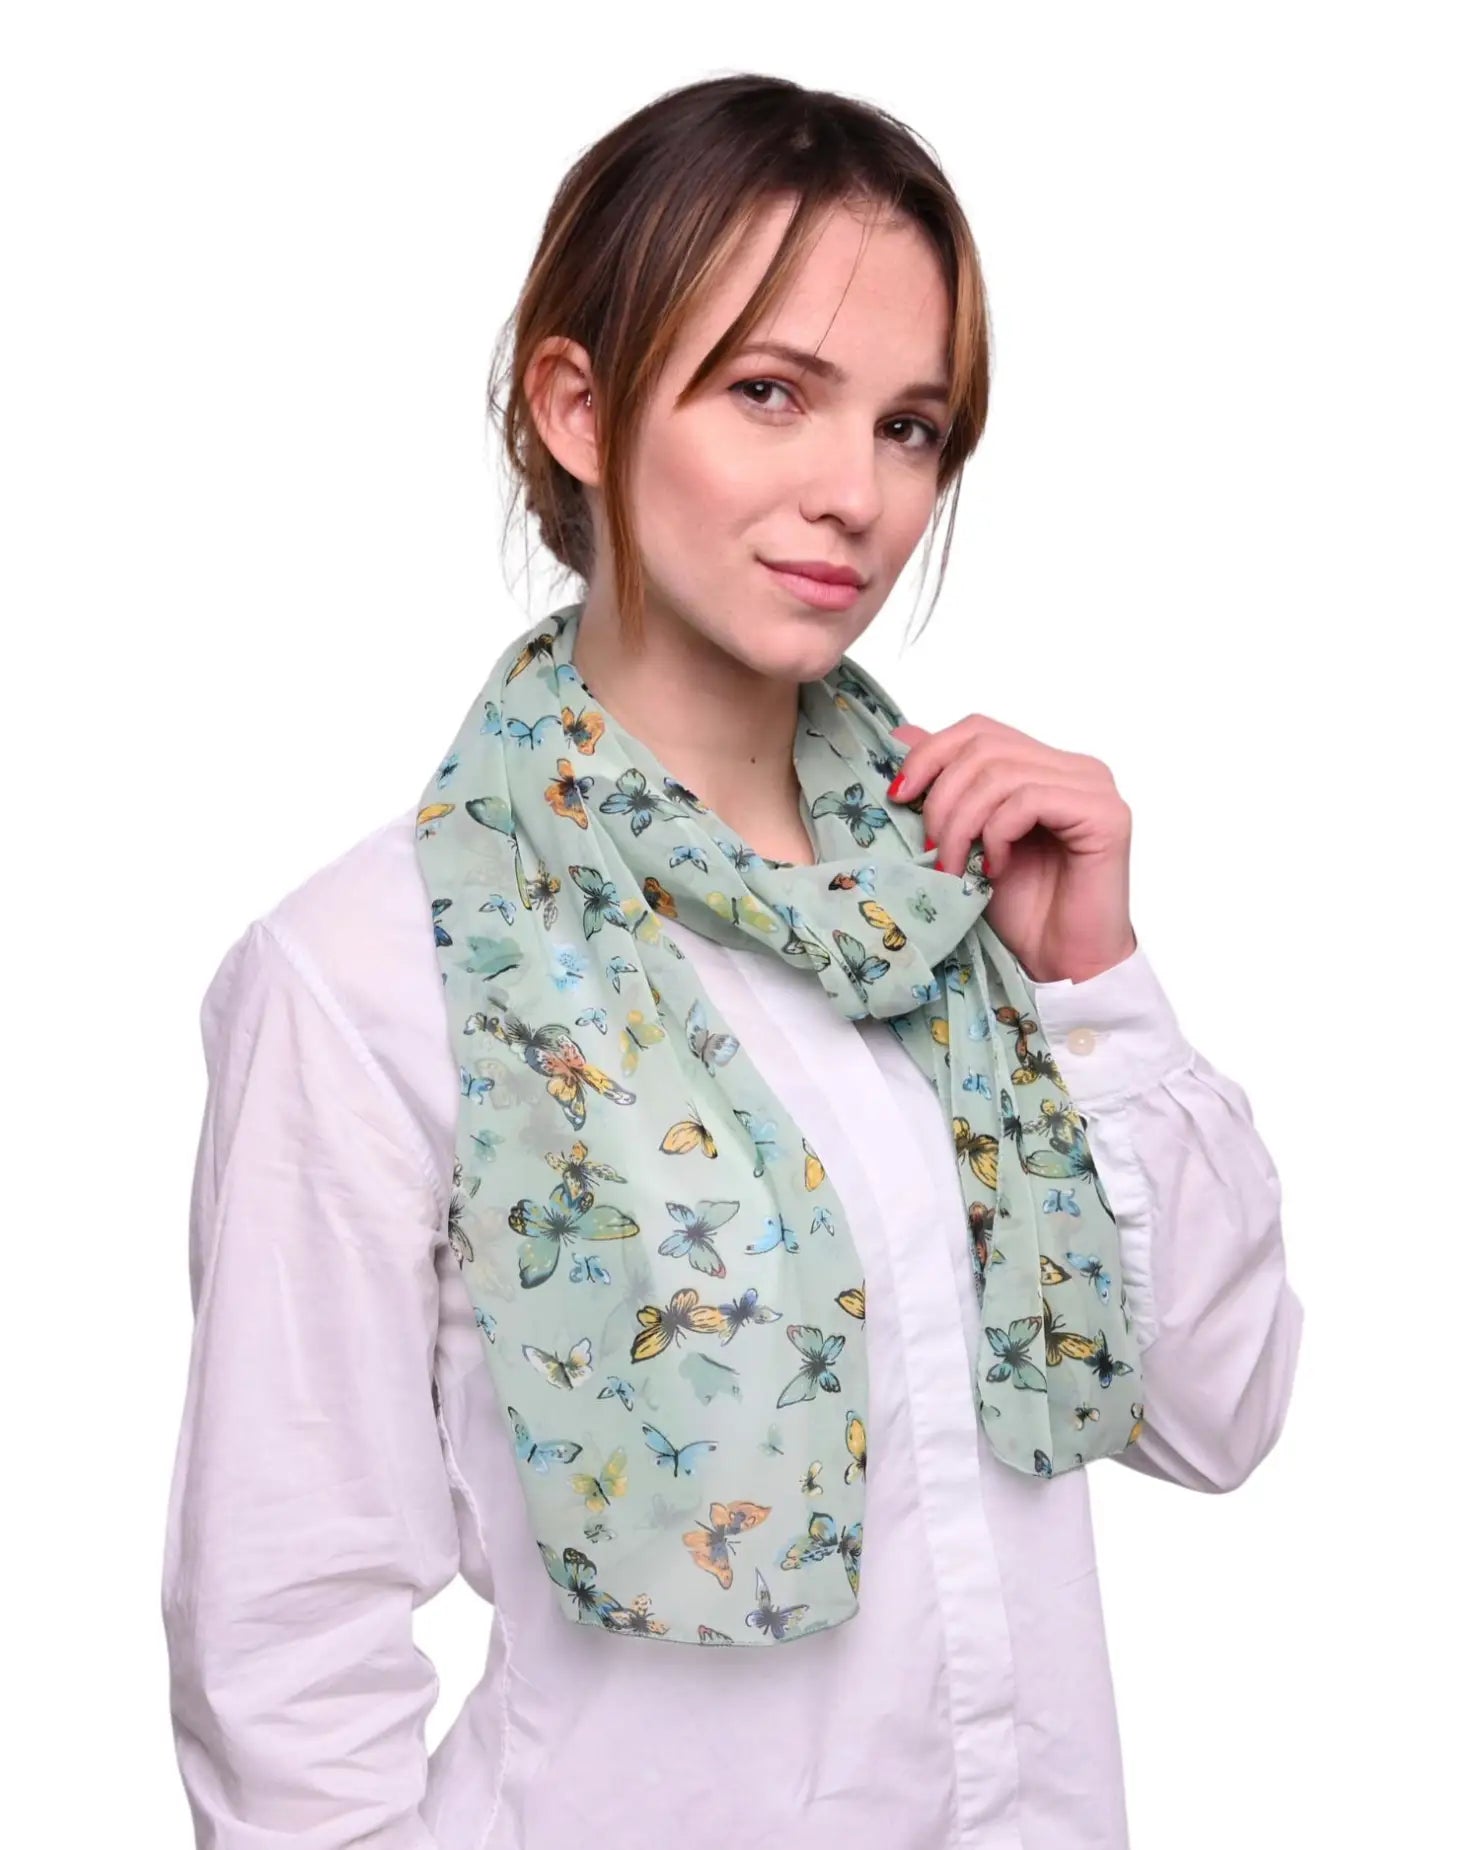 Butterfly Print Scarf: Stylish Accessory with Blue Scarf Design